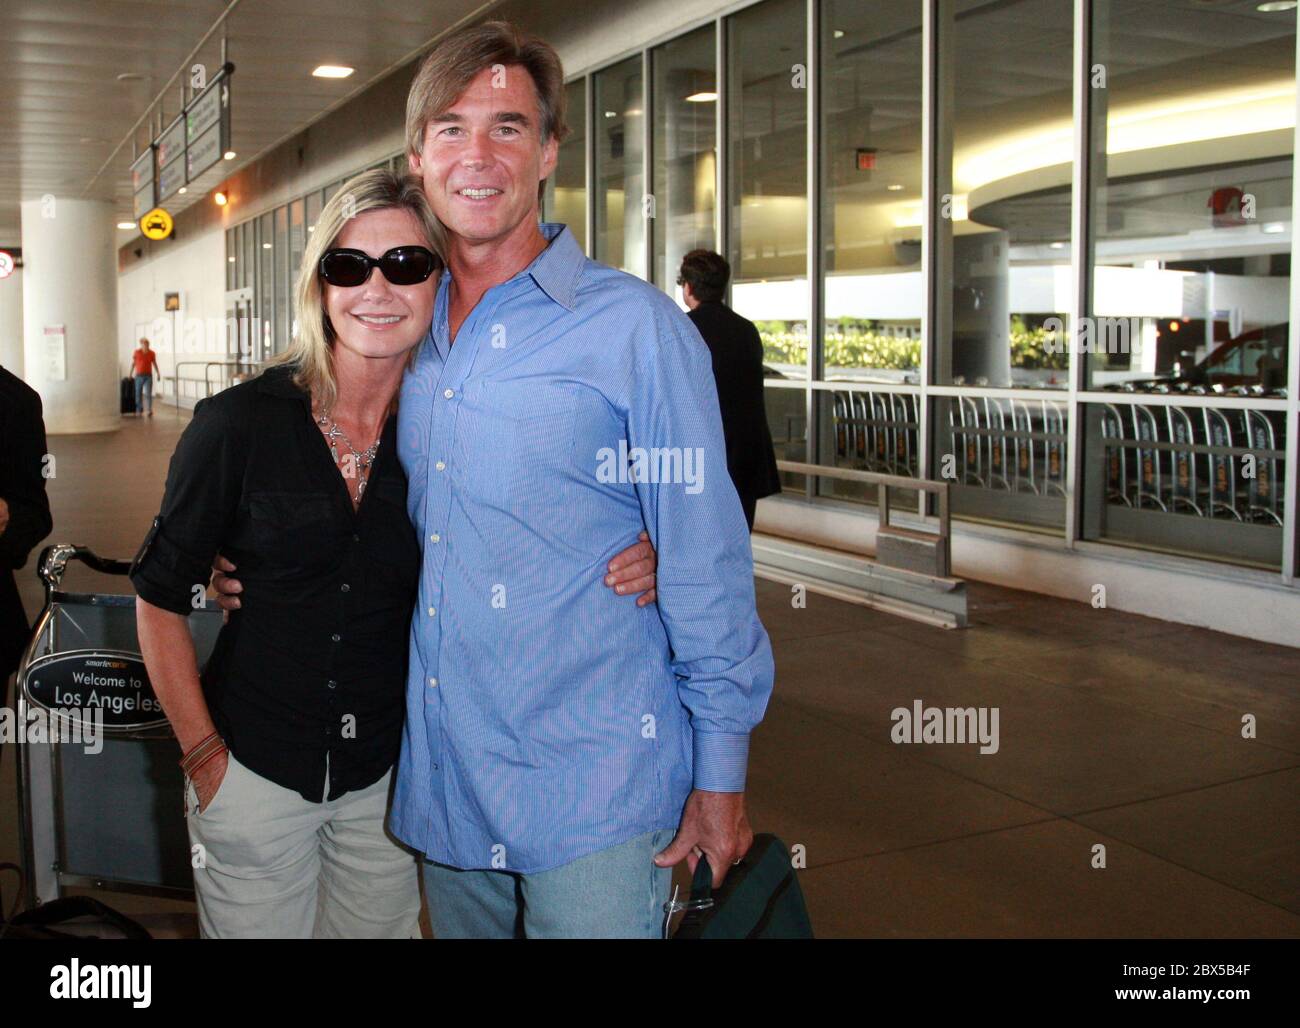 Olivia Newton-John and husband arrive at LAX Airport after a short vacation in Florida. Olivia was glowing and all smiles as she headed home. August 14 2008 Stock Photo